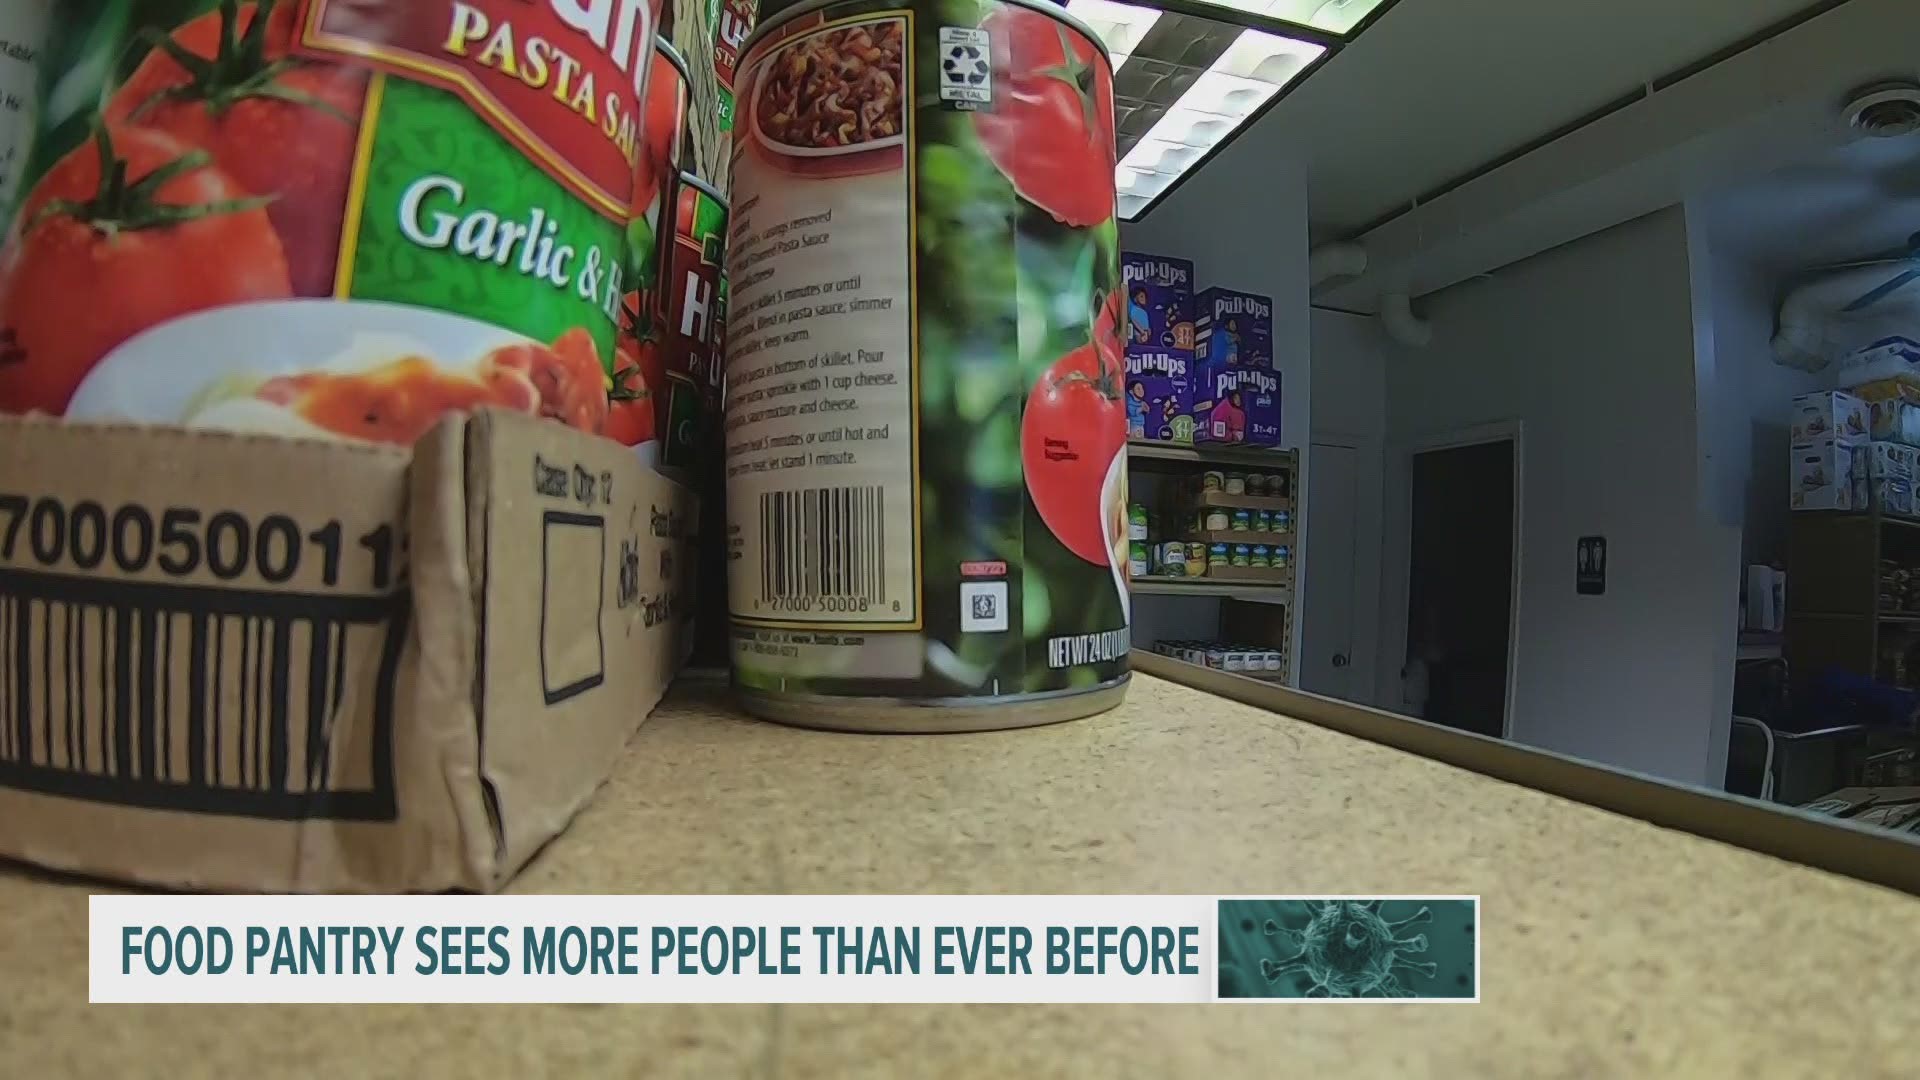 Food pantries are seeing an increase in families utilizing their services through the pandemic in Iowa.